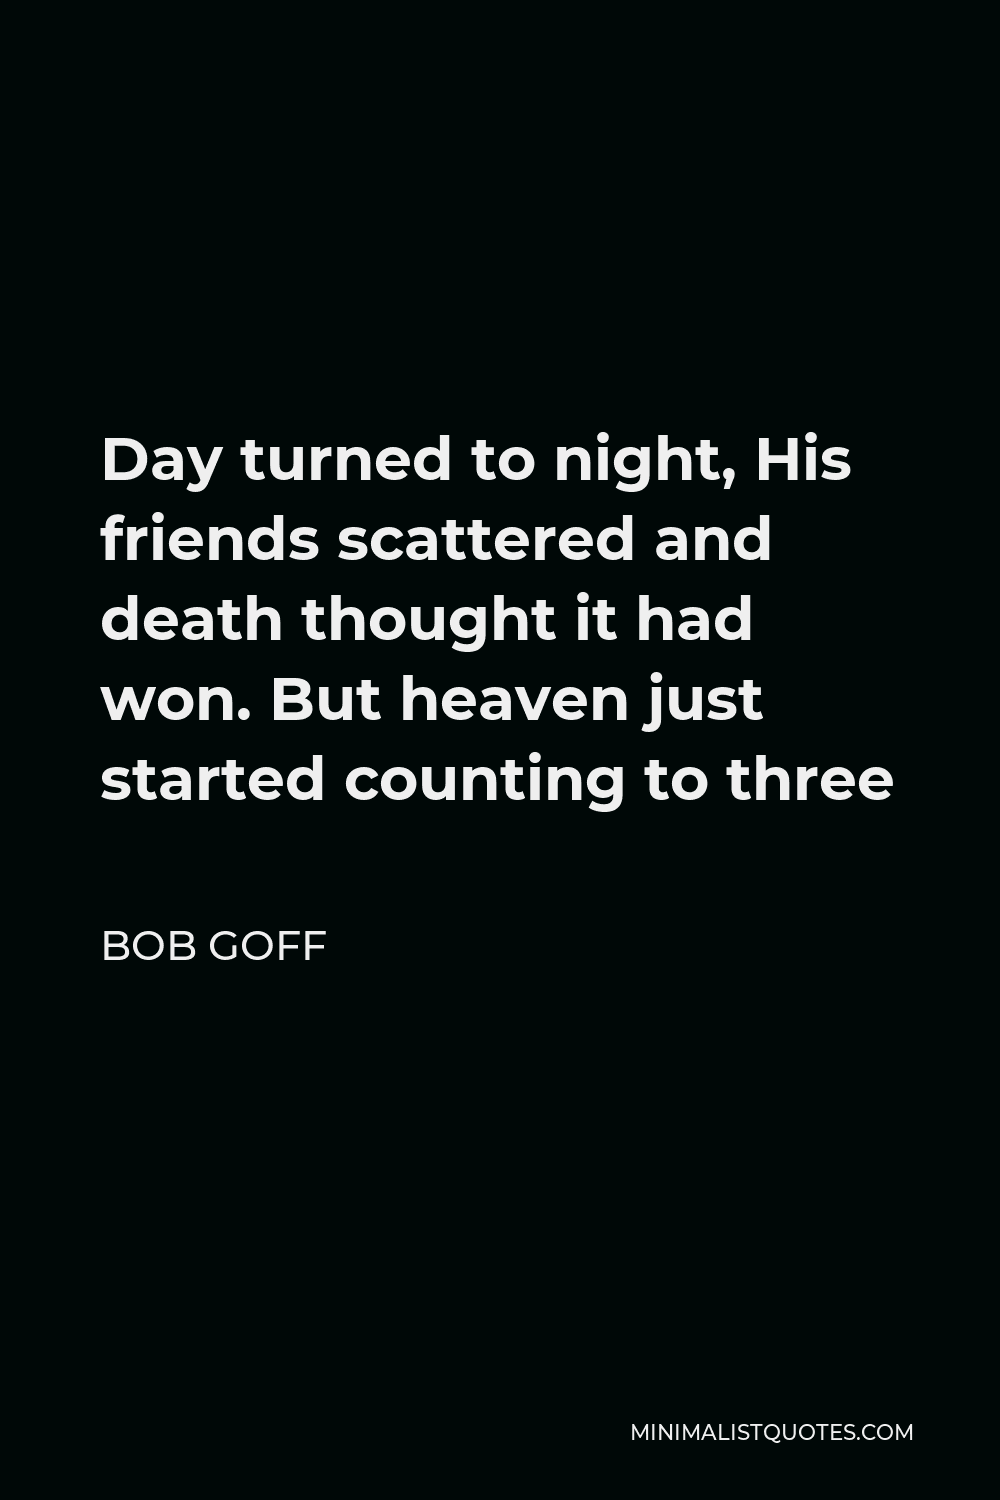 Bob Goff Quote - Day turned to night, His friends scattered and death thought it had won. But heaven just started counting to three